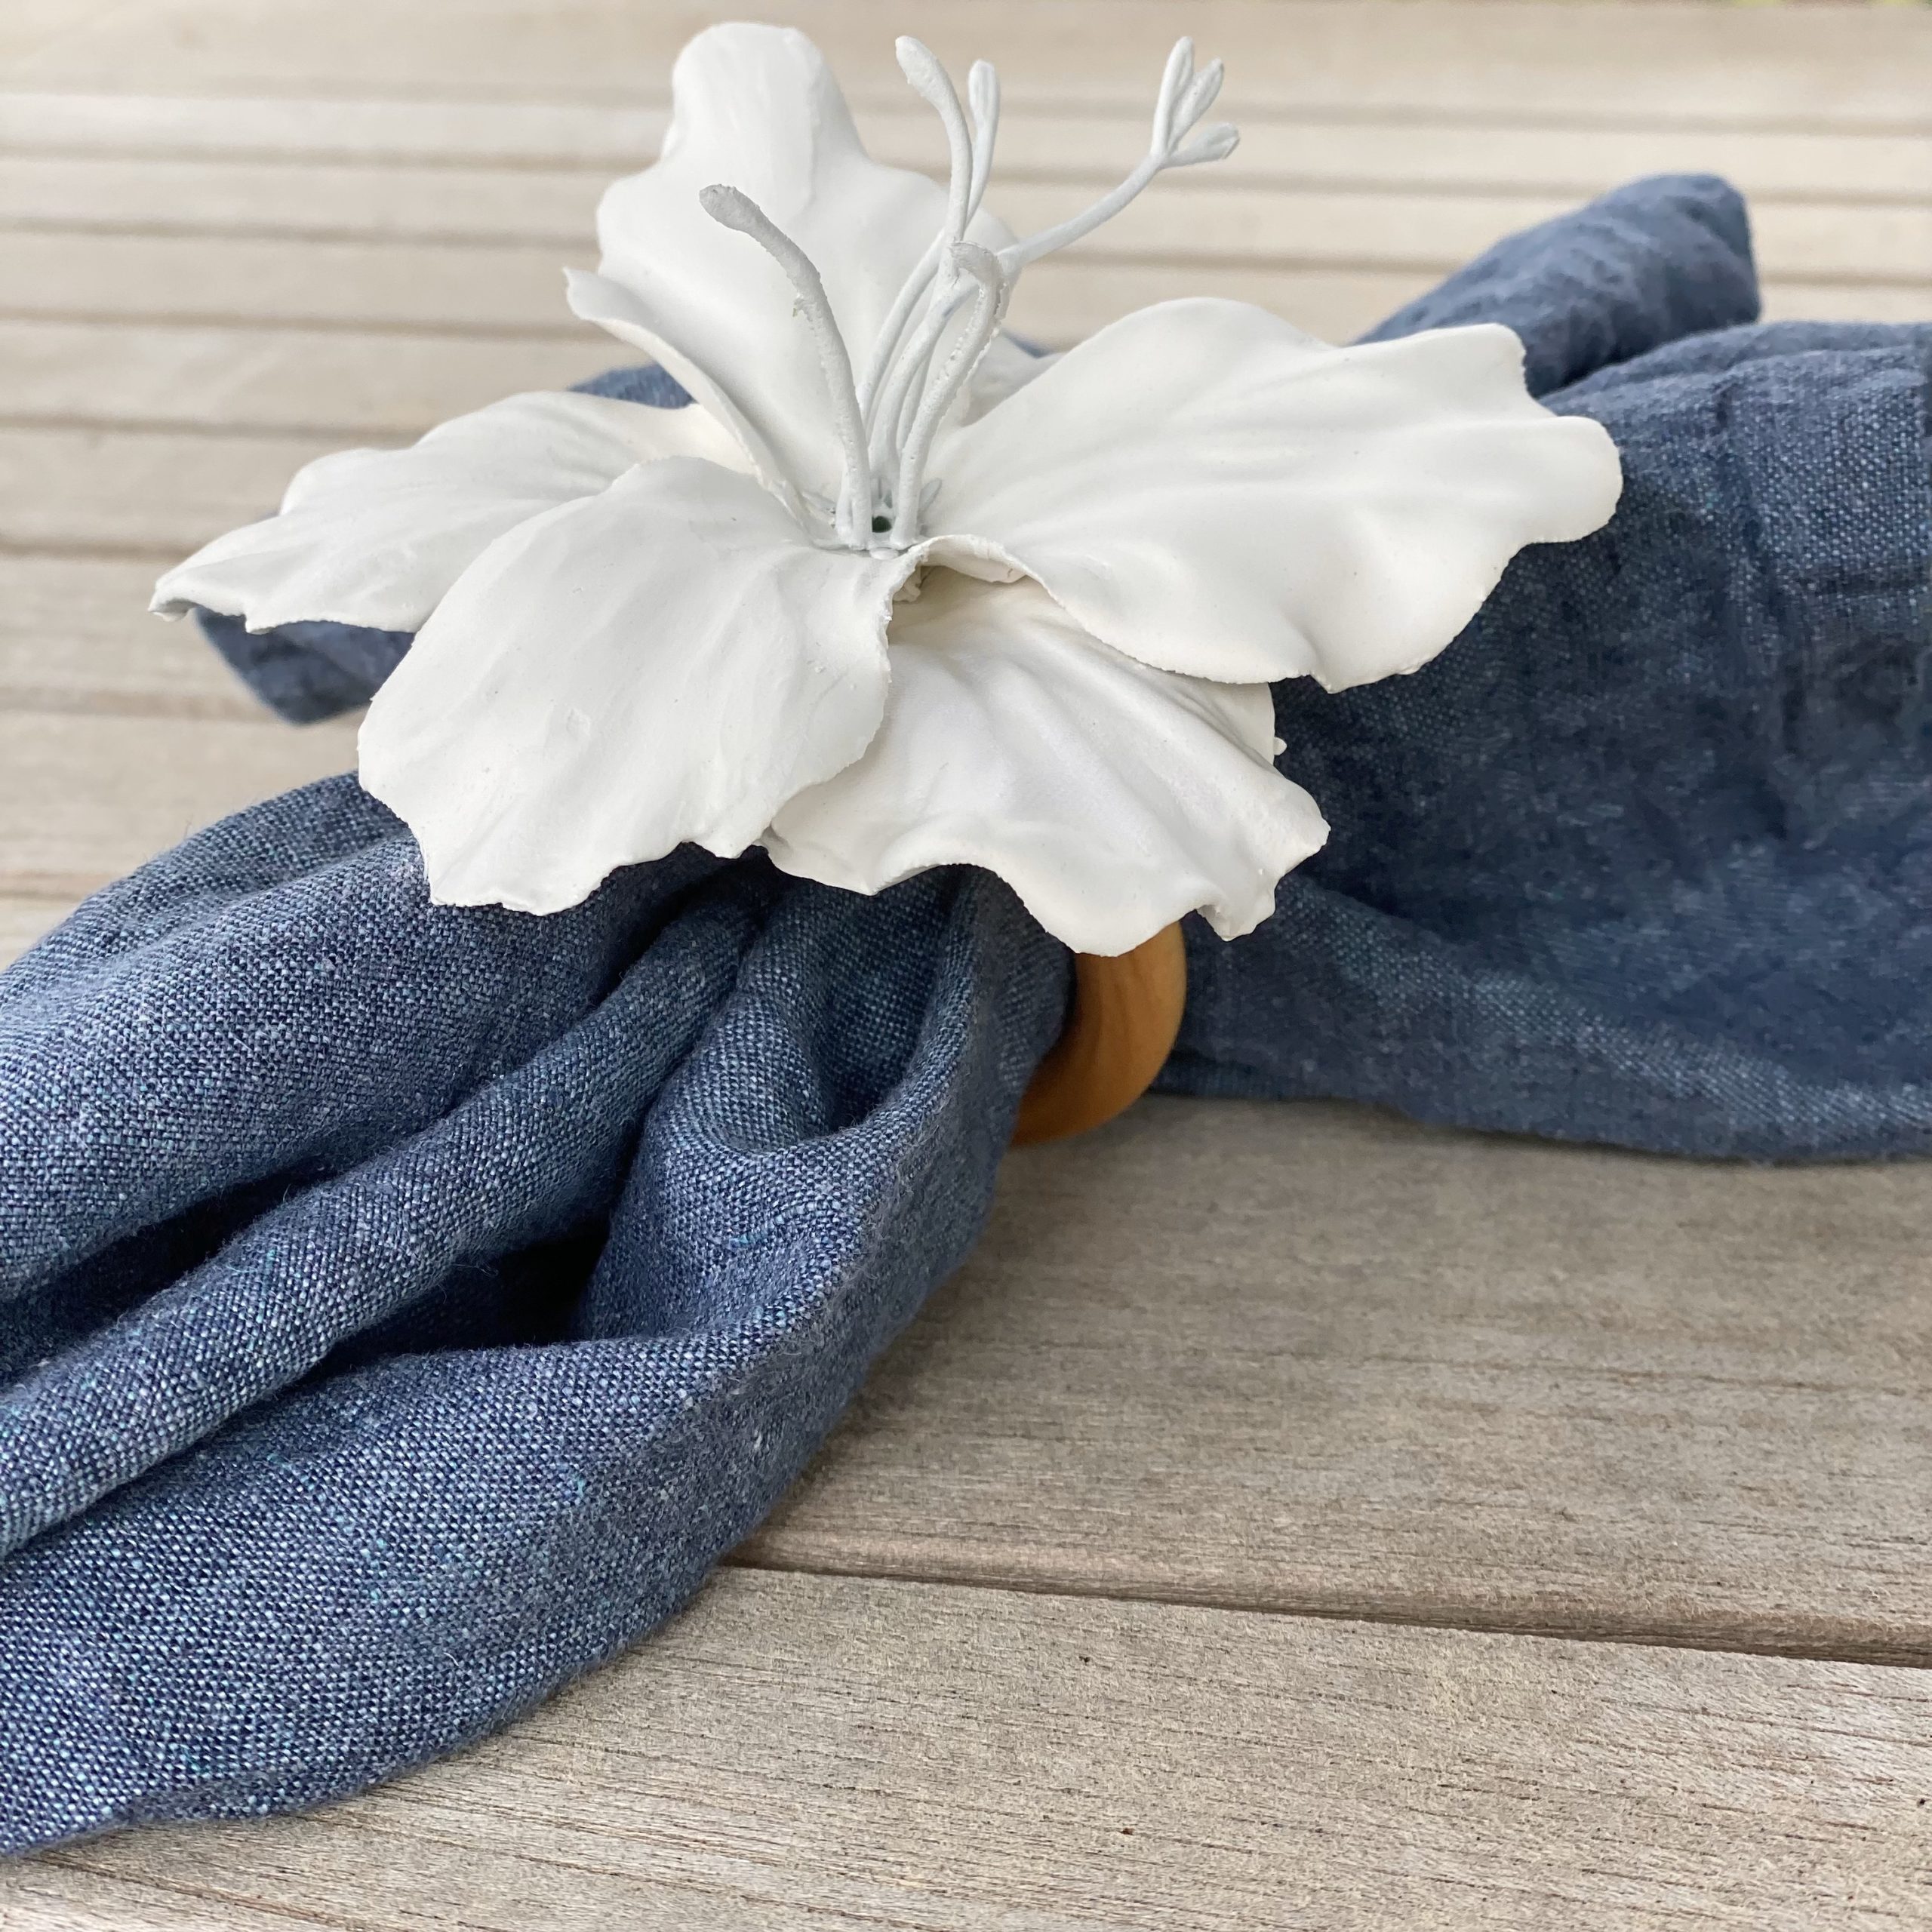 Plaster of paris floral napkin ring with a blue linen napkin in it.